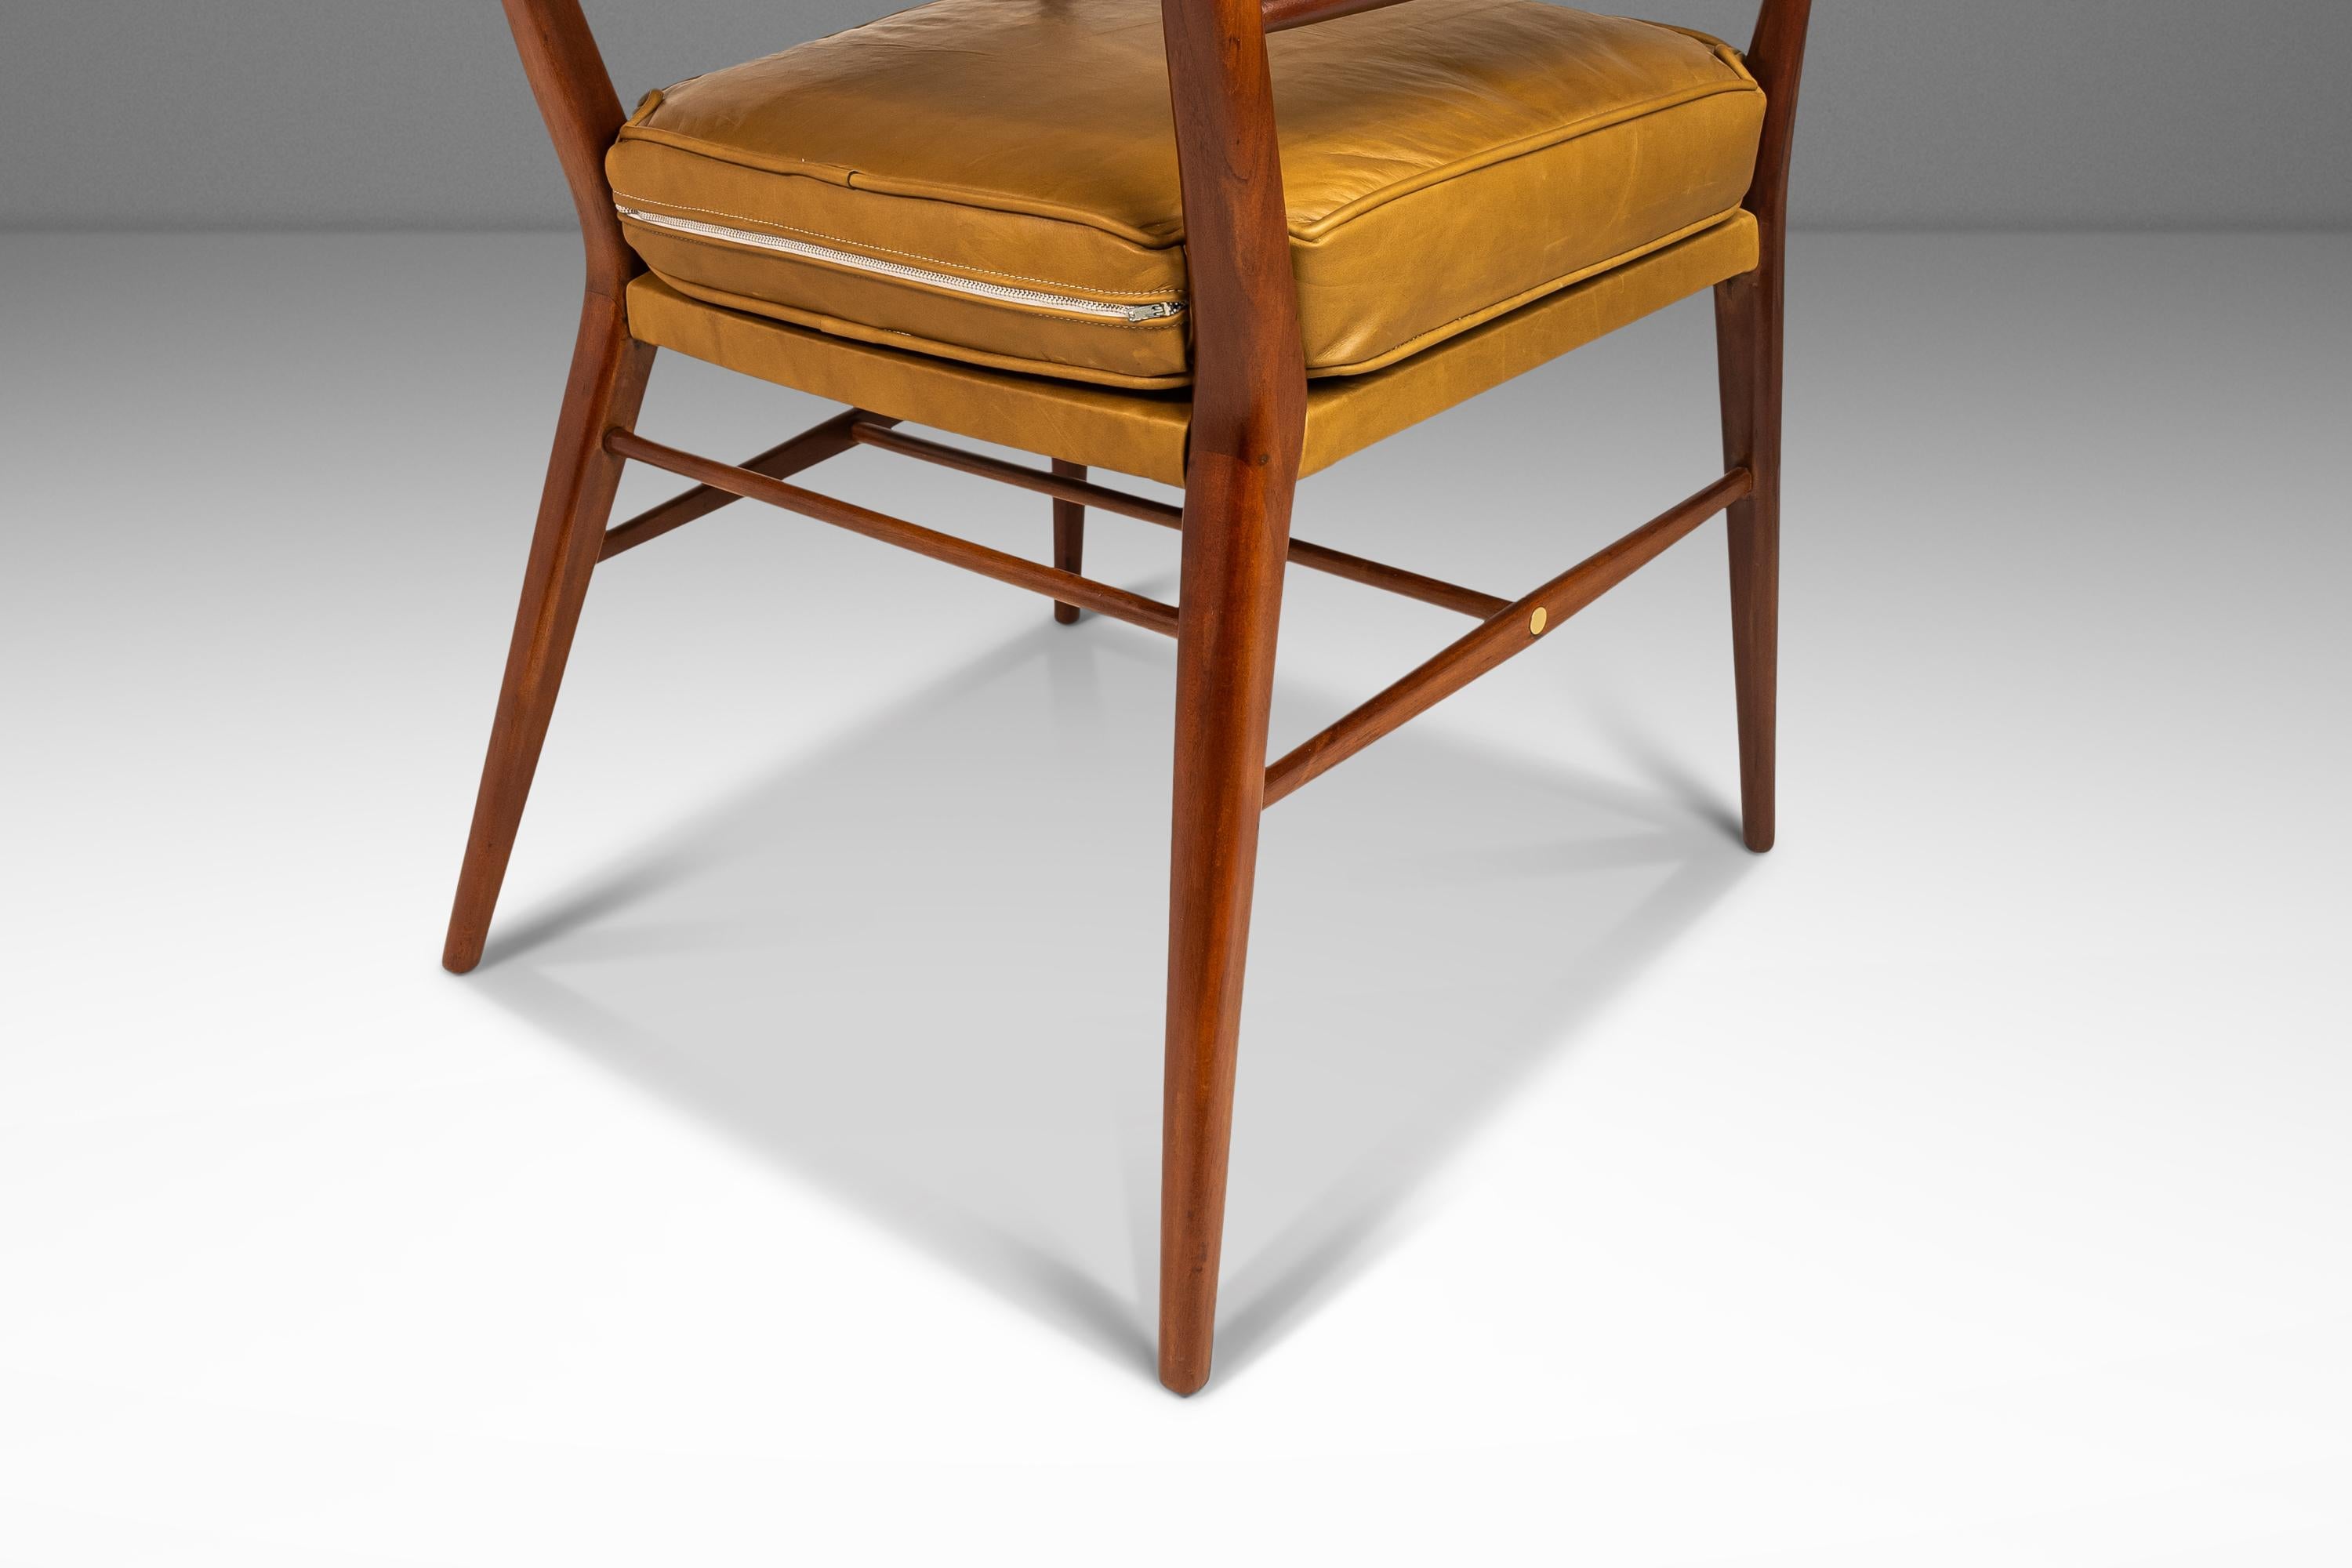 MCM Model 7001 Chair in Walnut by Paul McCobb for Directional, USA, c. 1950s For Sale 9